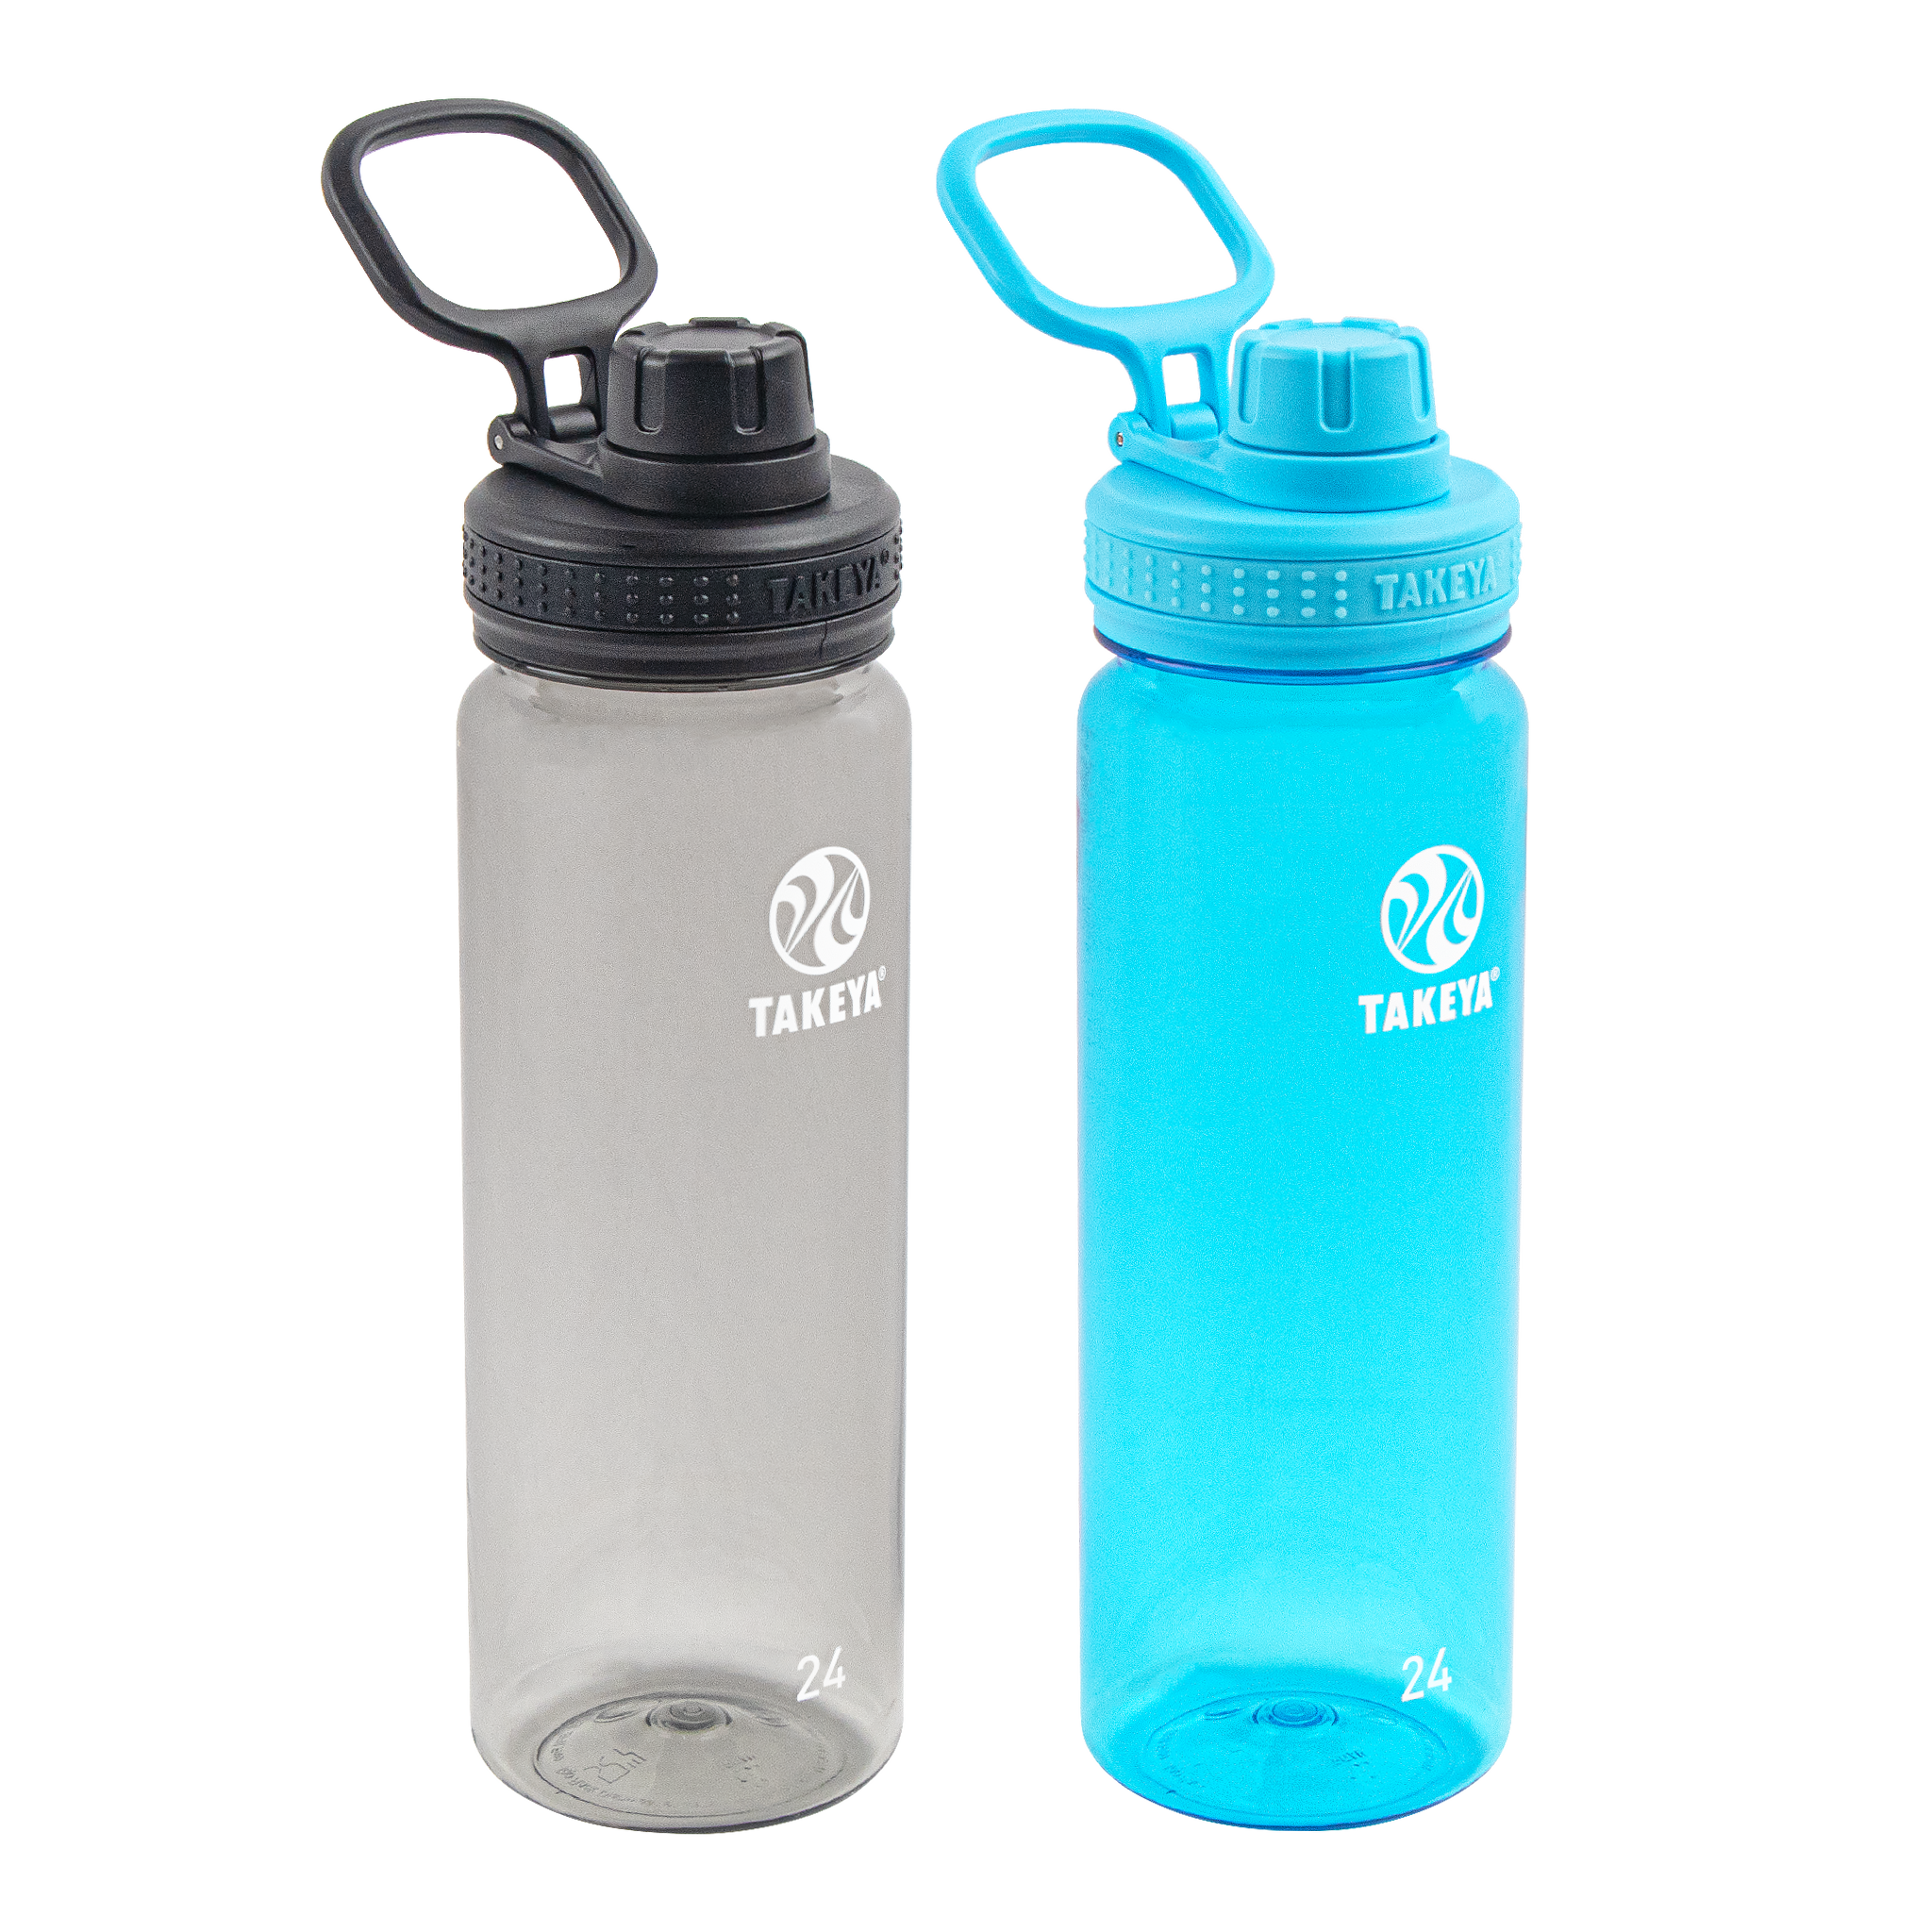 Takeya 24oz Originals Insulated Stainless Steel Water Bottle with Spout Lid  - Teal